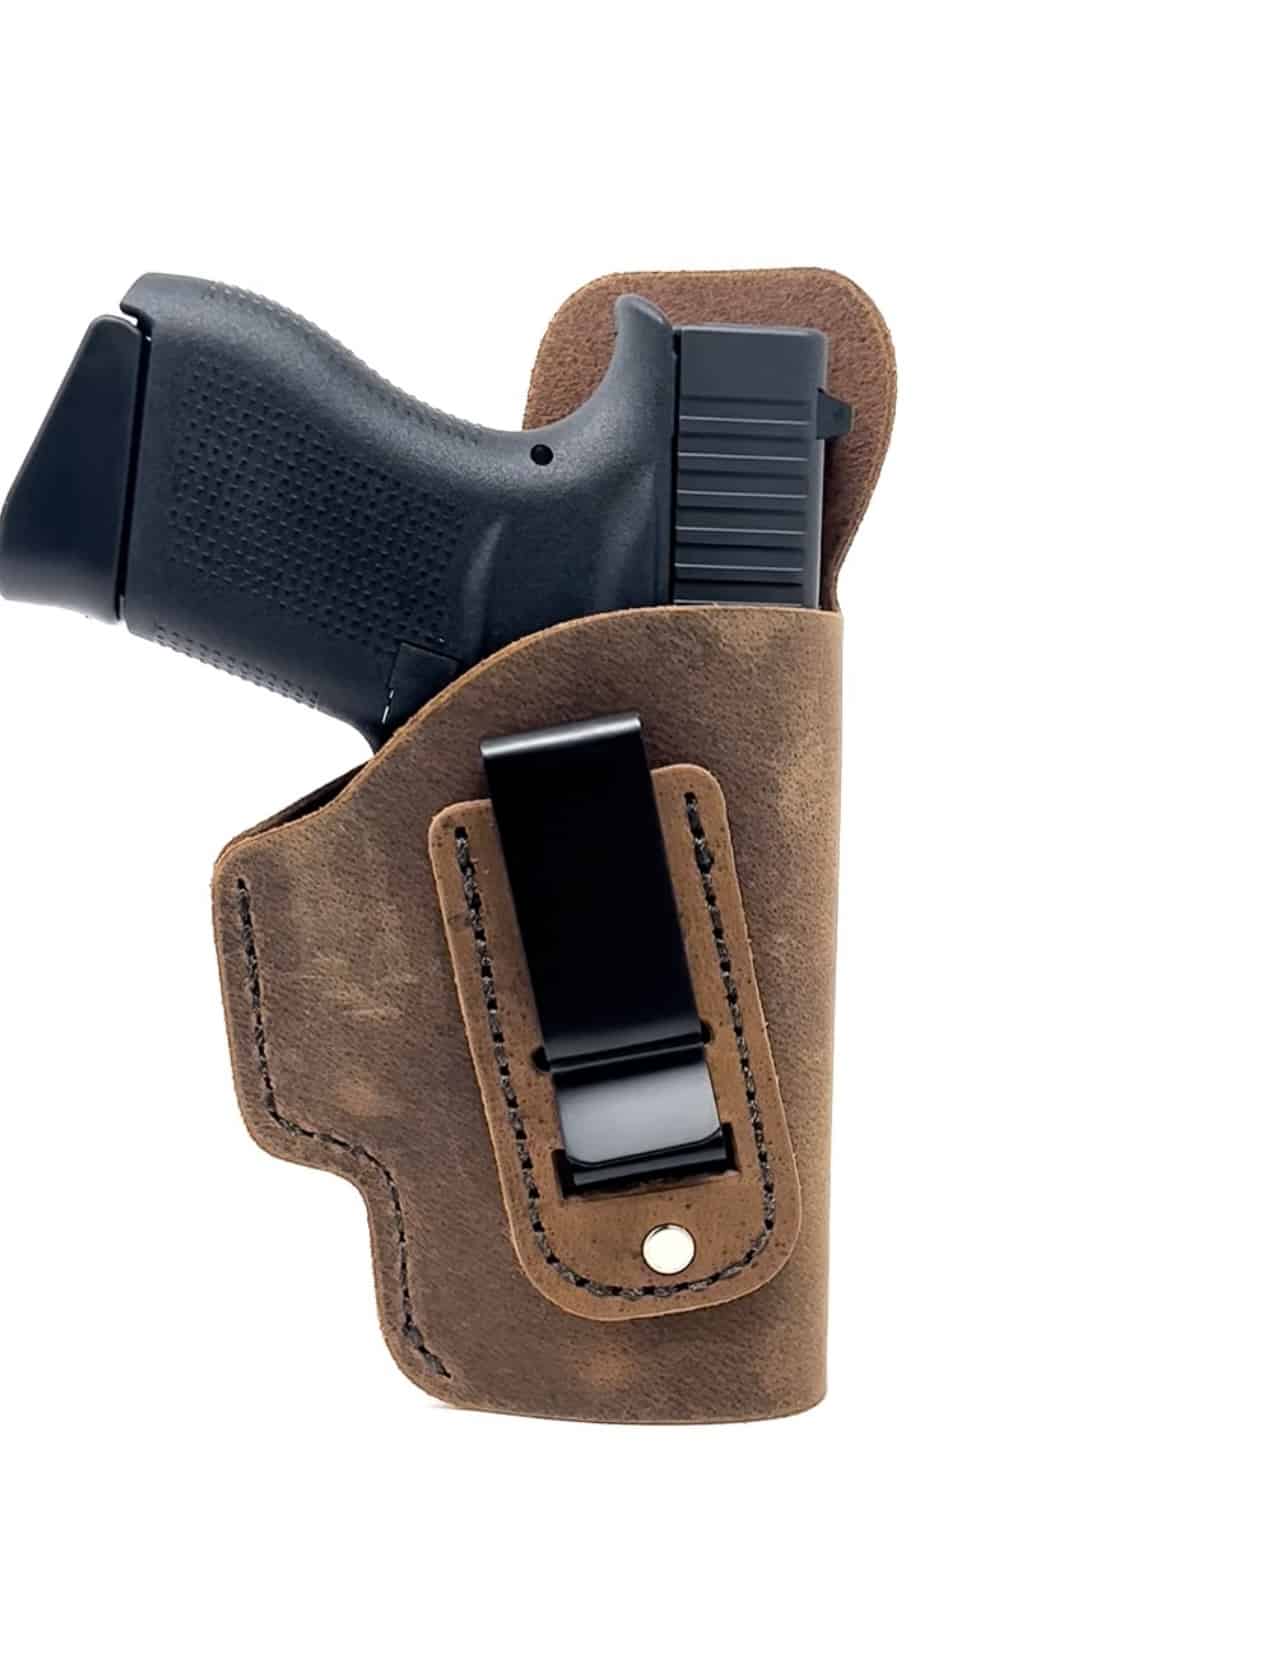 IWB Kydex/Leather Holster small print with adjustable retention for Taurus 